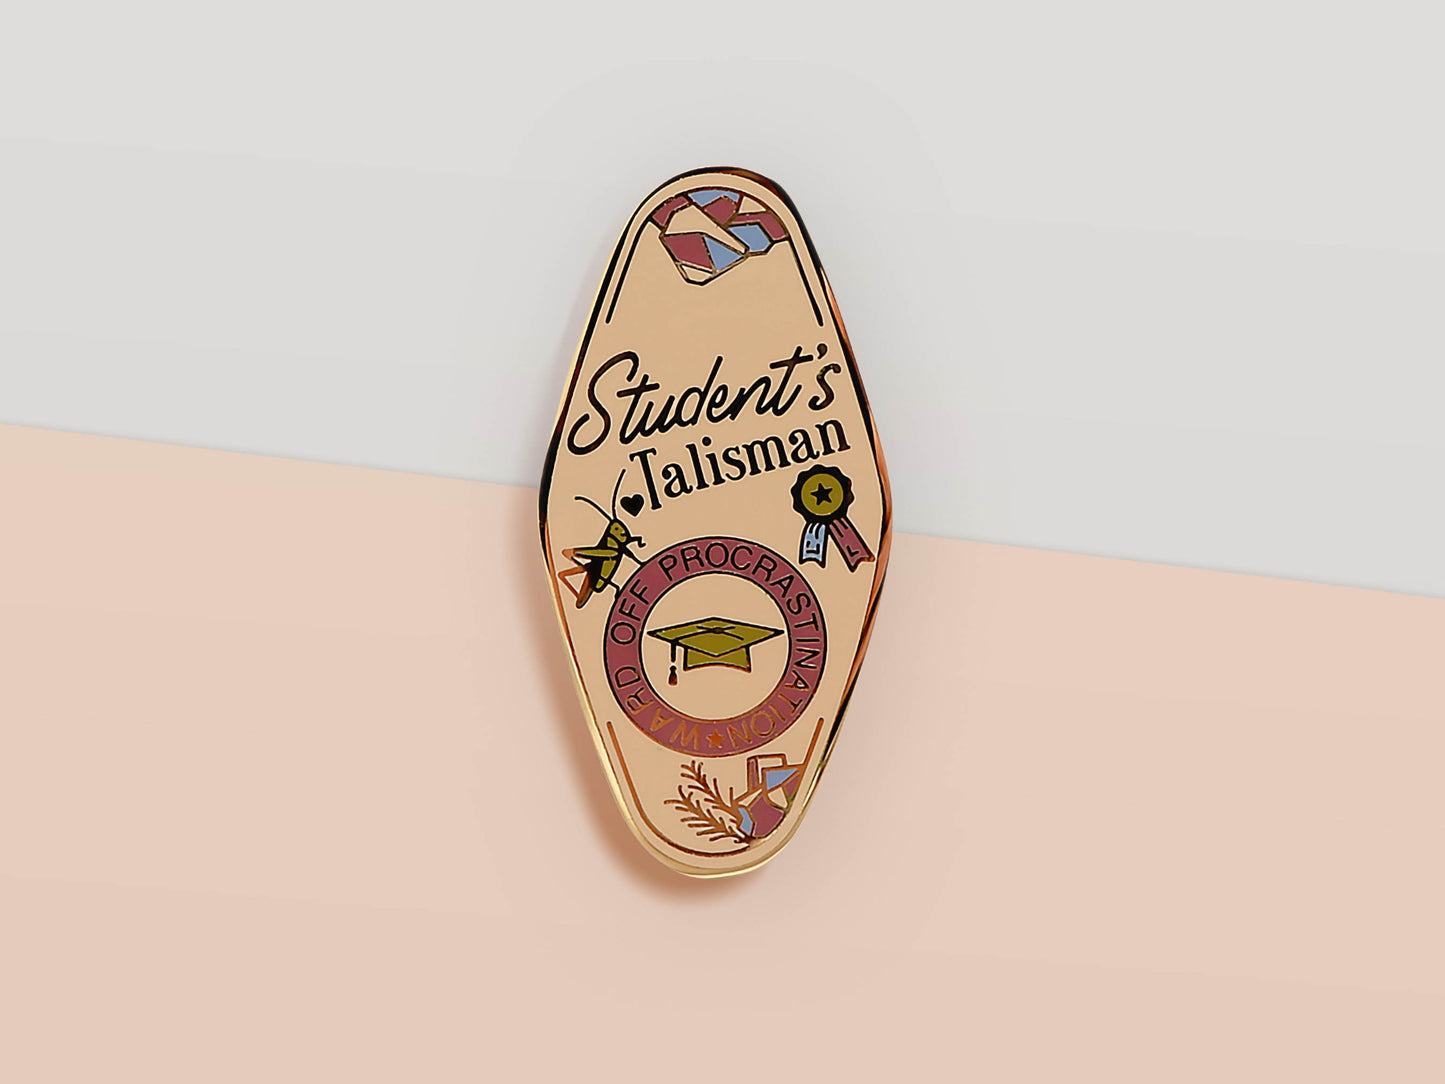 Gold Enamel Talisman Pin with white design and the words Student's Talisman, Ward of procrastination. The pins design includes a graduation cap and a rosette, a grass hopper, as well as plants and crystals.